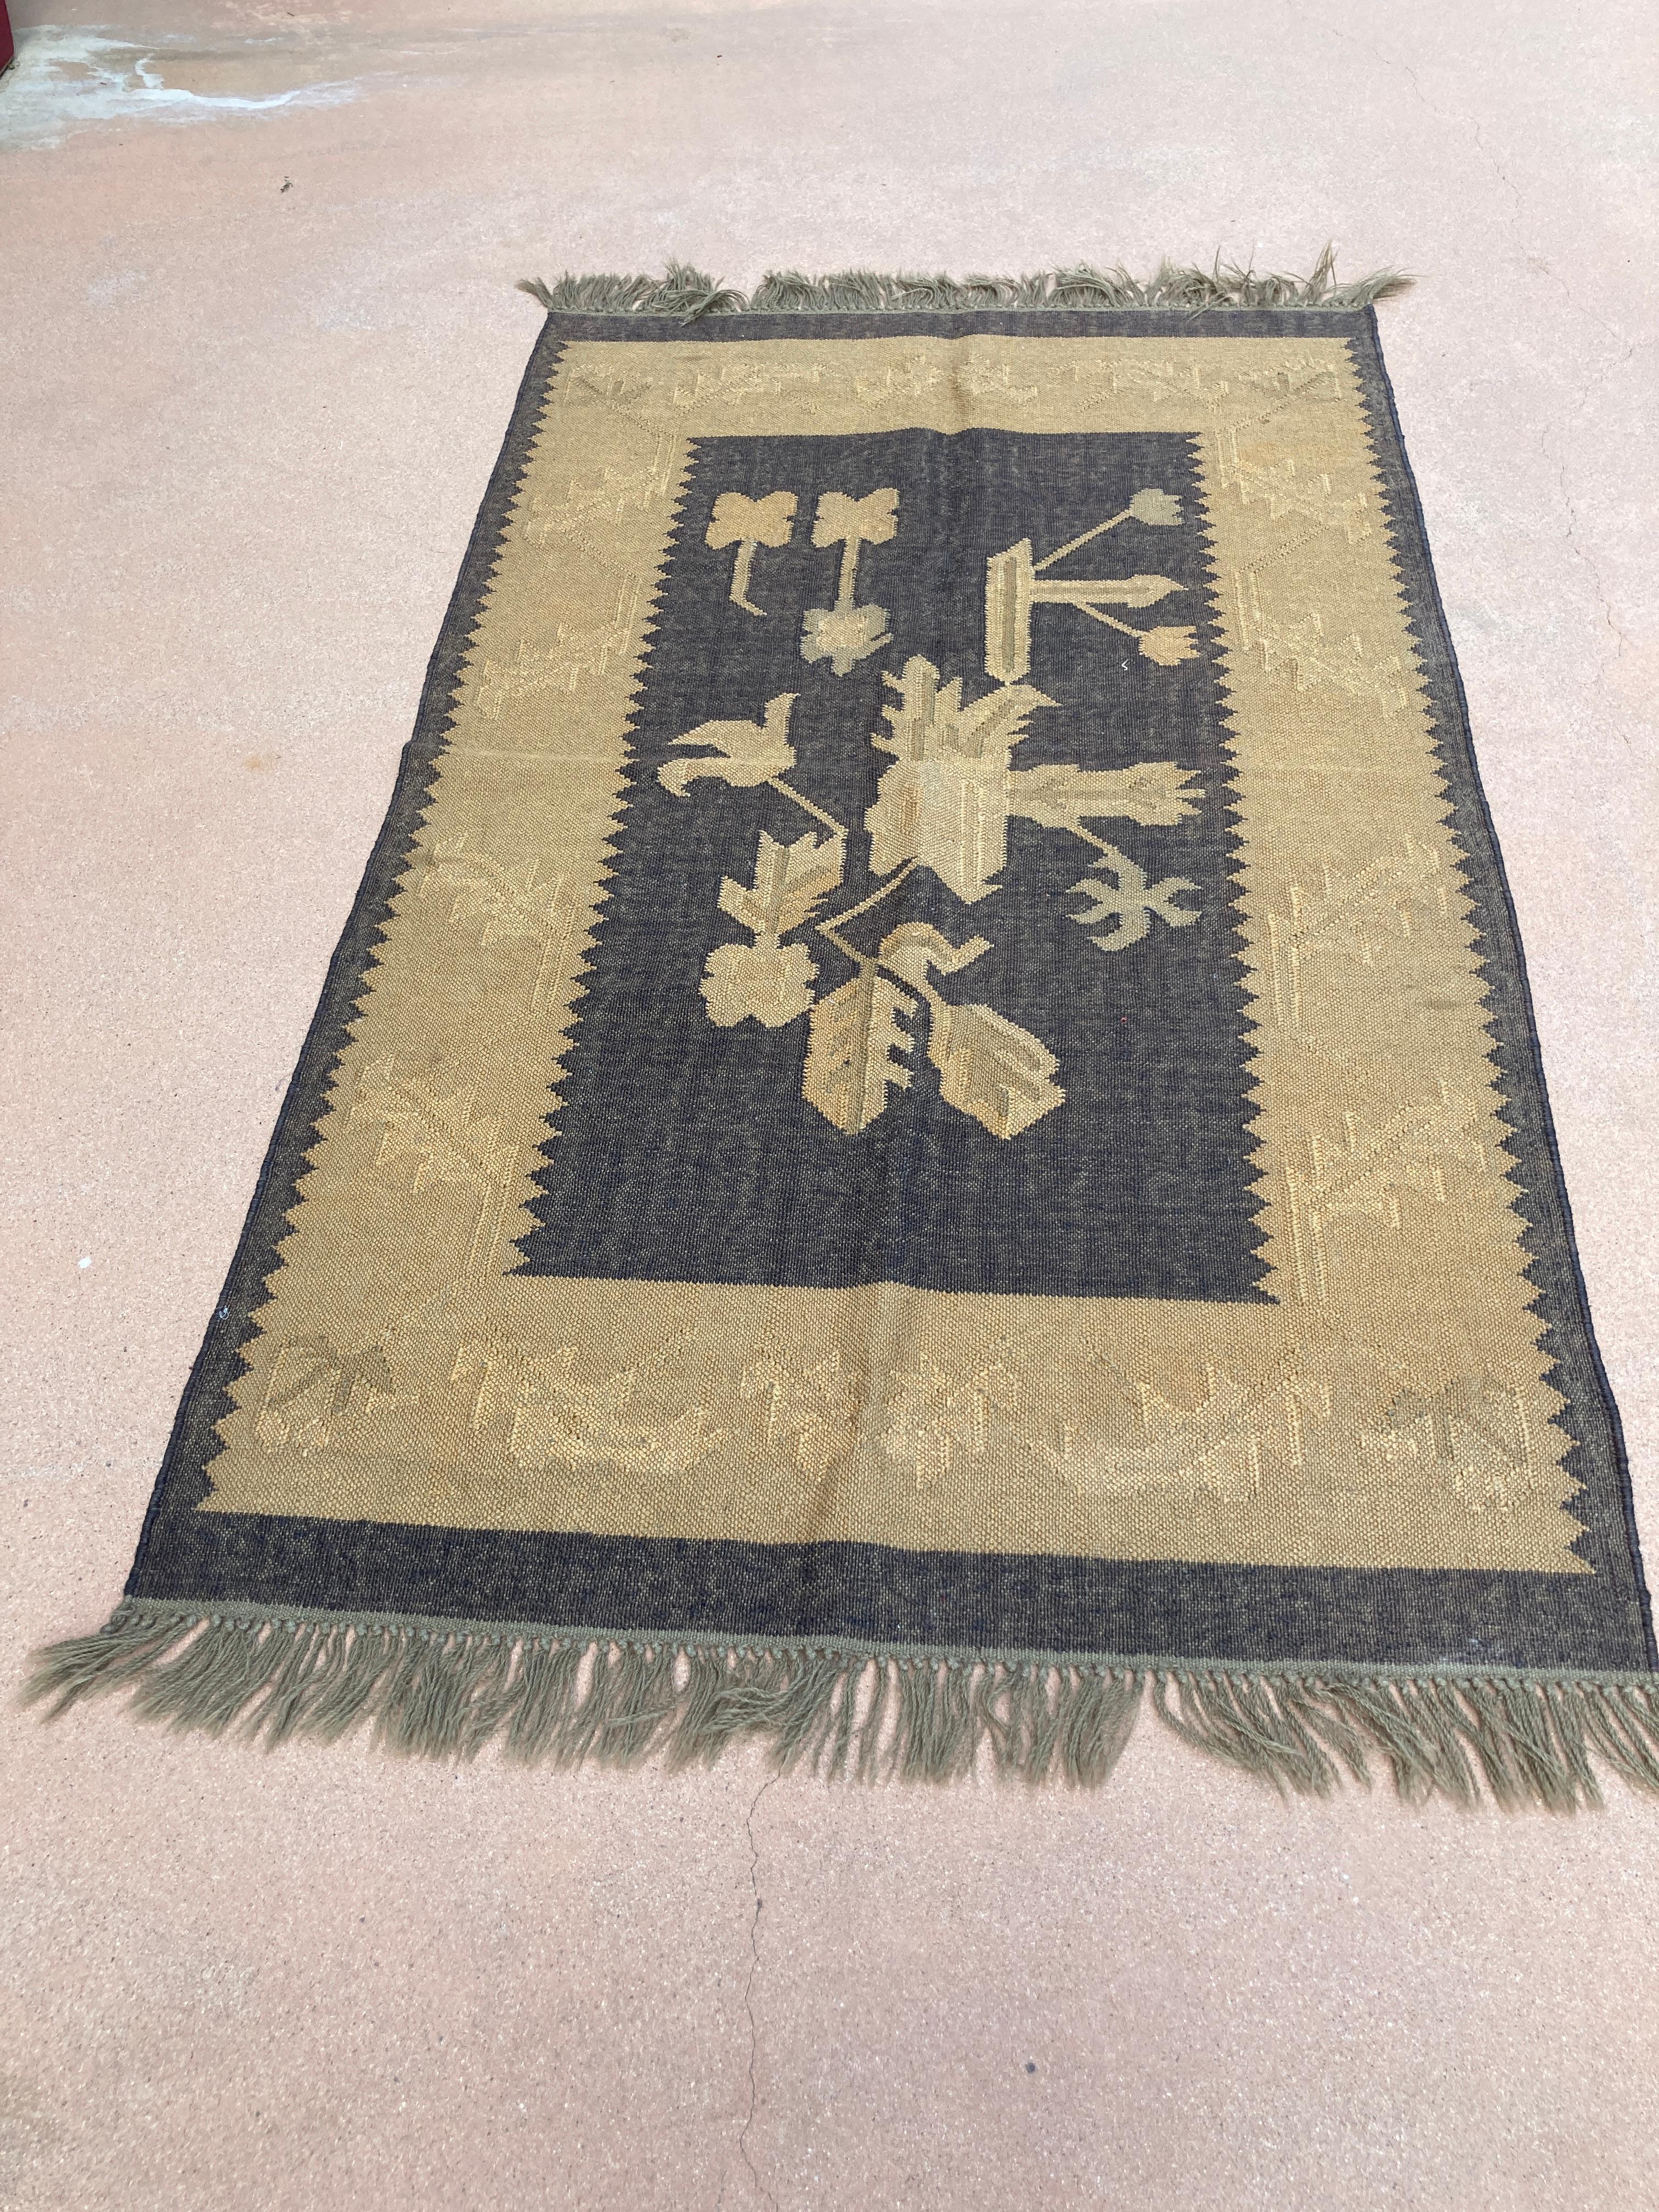 Vintage small ethnic rug.Handcrafted South Asian tribal rug hand-woven with floral and geometric designs.This rug is made from hand-spun wool colored with vegetable dyes.Great to use in the hall-way or bathroom.Rare muted duo colors.
Size: 5'10 x